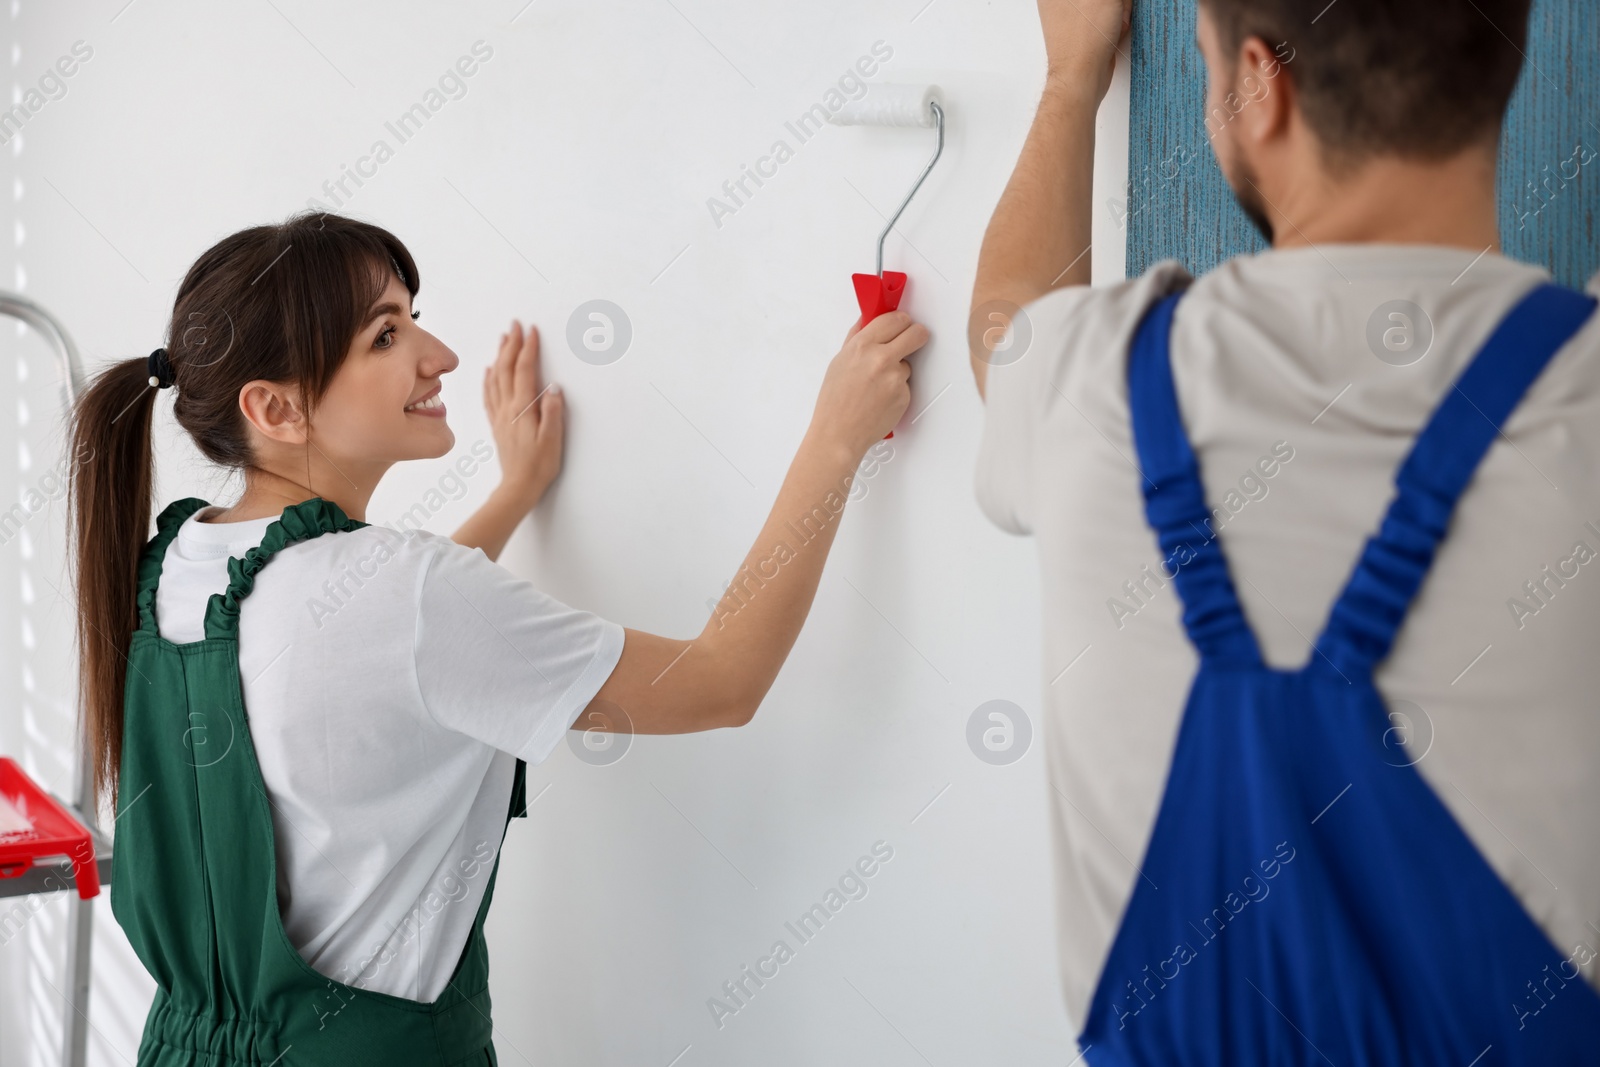 Photo of Workers hanging light blue wallpaper in room